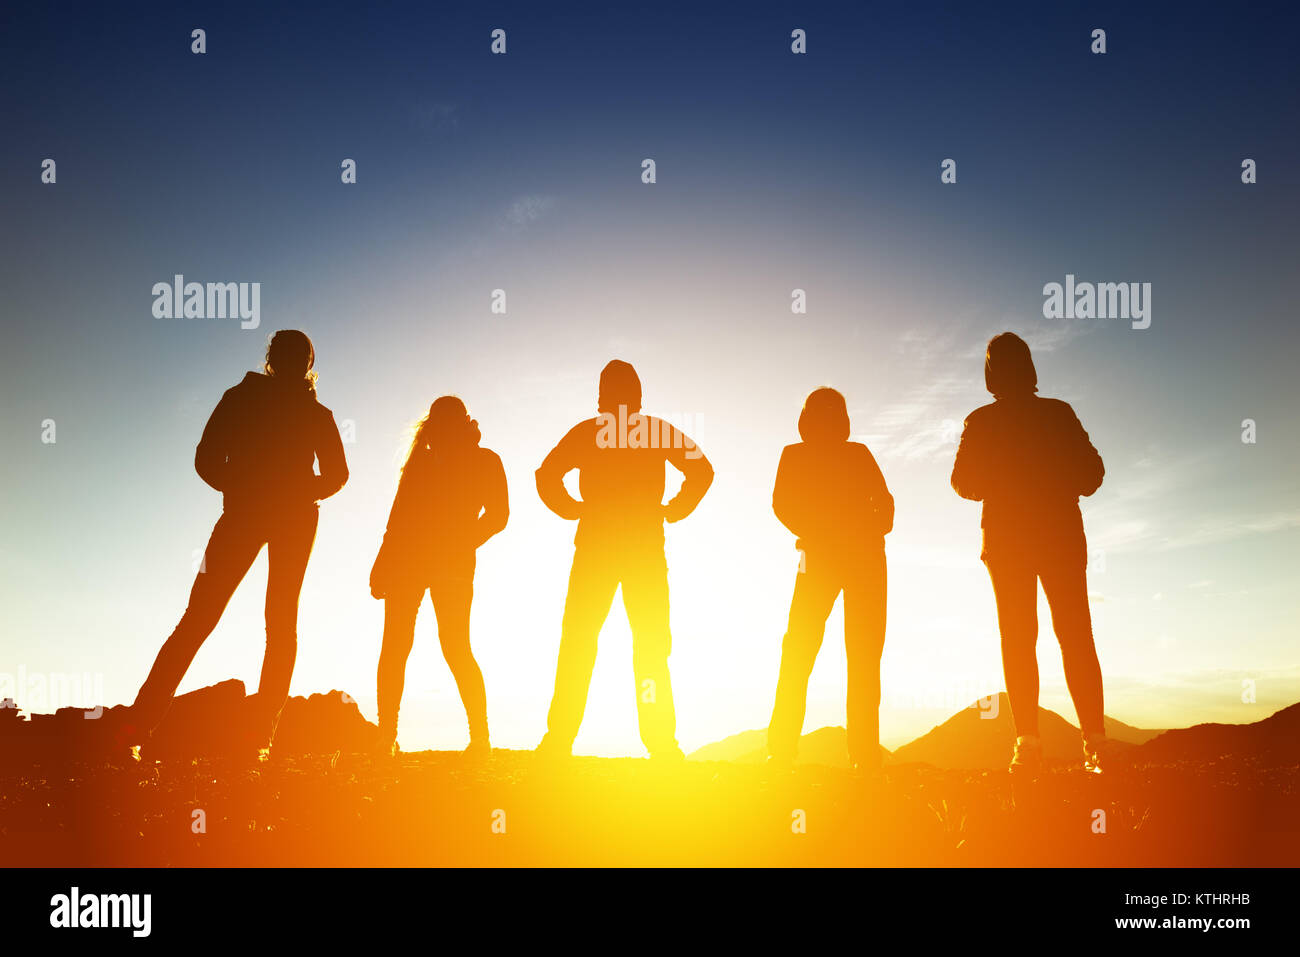 Group of five peoples silhouettes in sunset light Stock Photo